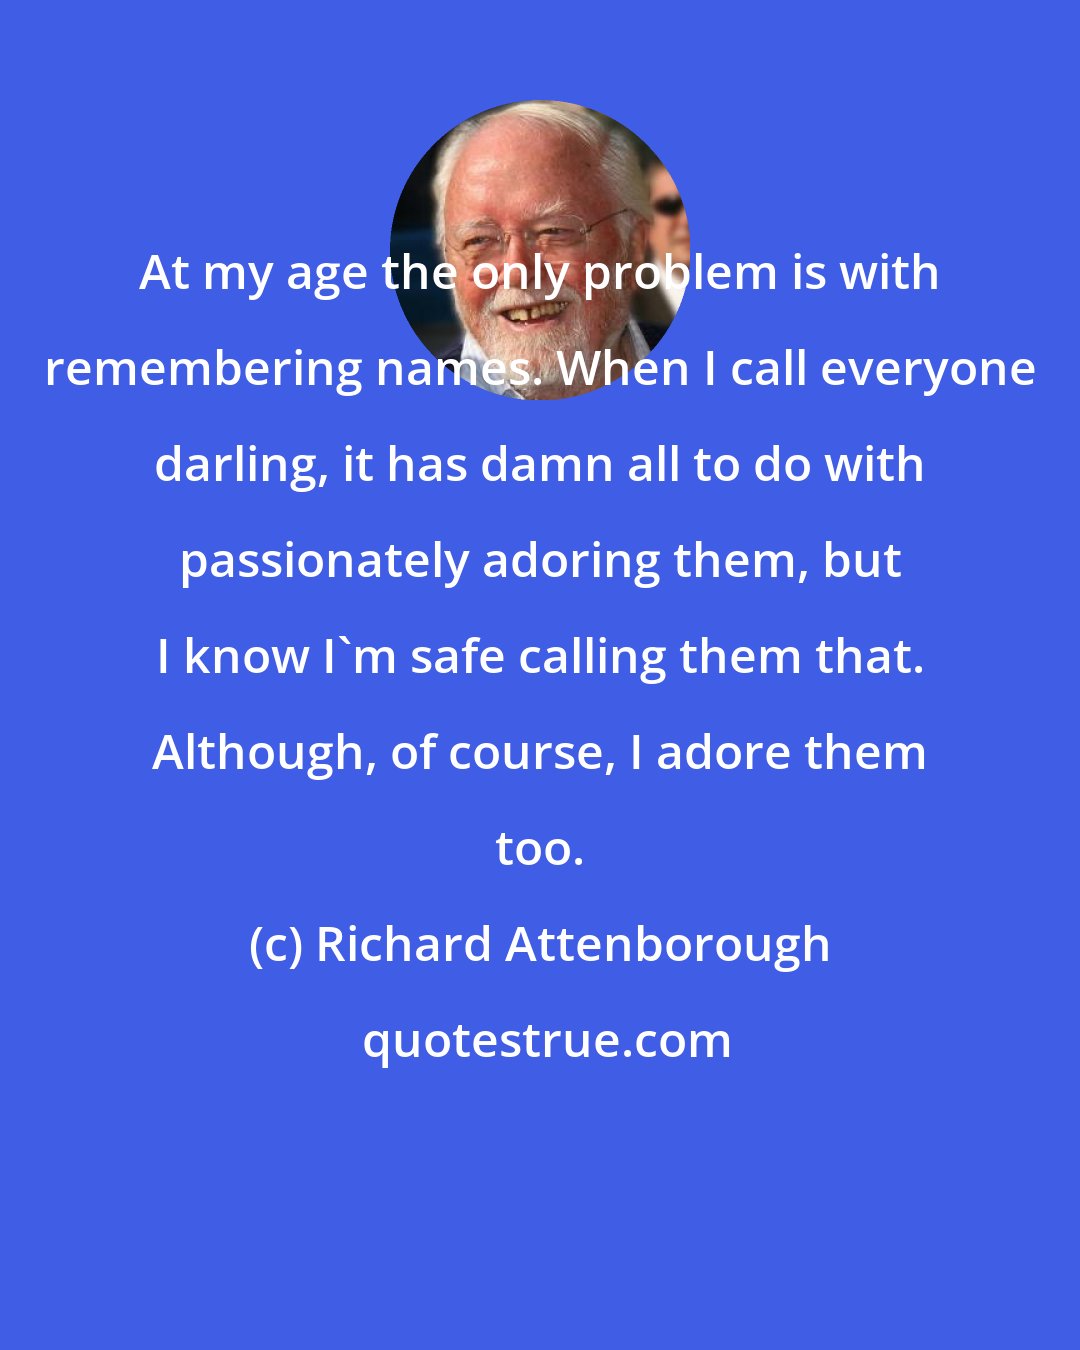 Richard Attenborough: At my age the only problem is with remembering names. When I call everyone darling, it has damn all to do with passionately adoring them, but I know I'm safe calling them that. Although, of course, I adore them too.